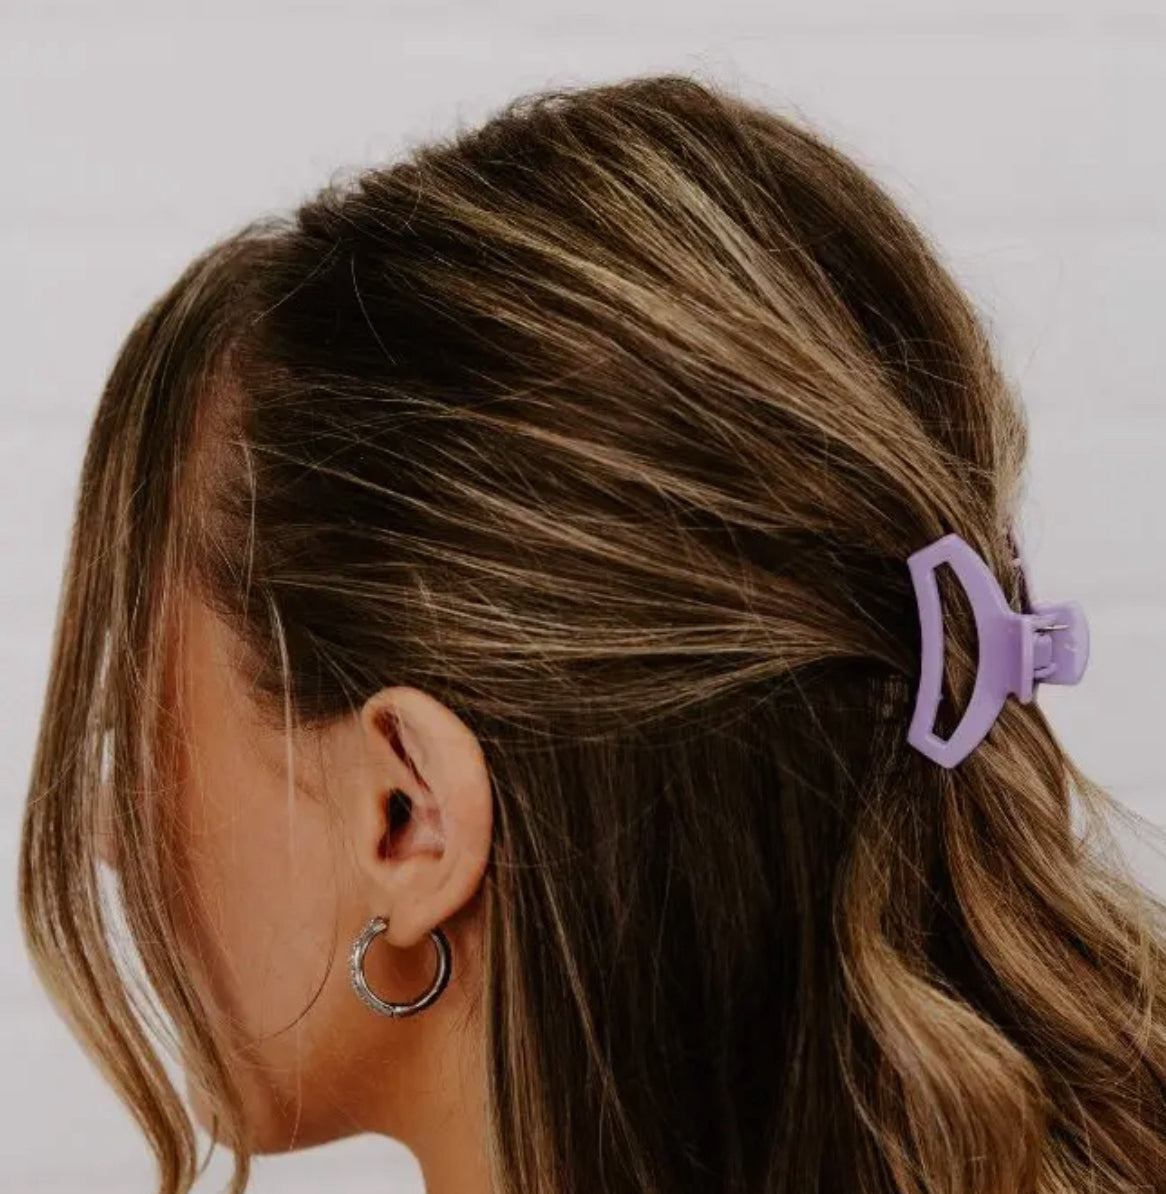 Teleties Size Tiny Hair Accessories